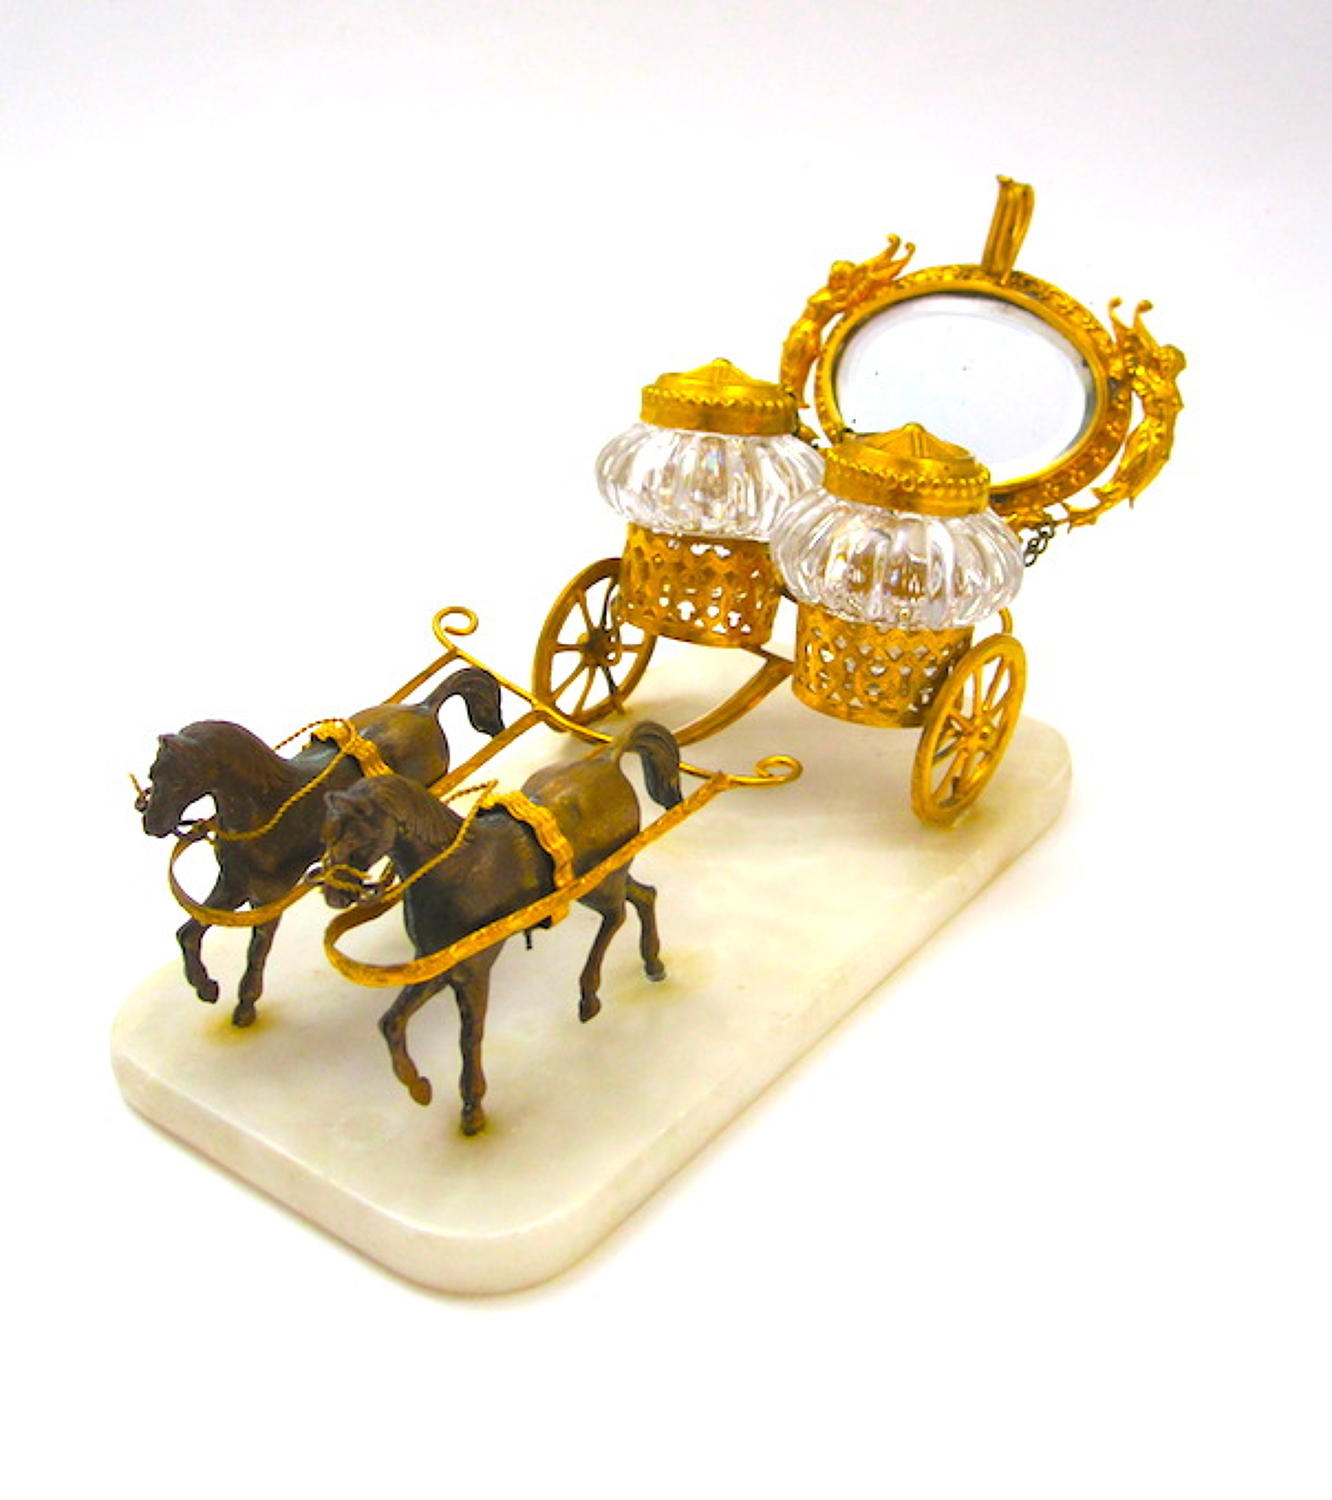 Large Palais Royal BACCARAT Inkwell Carriage